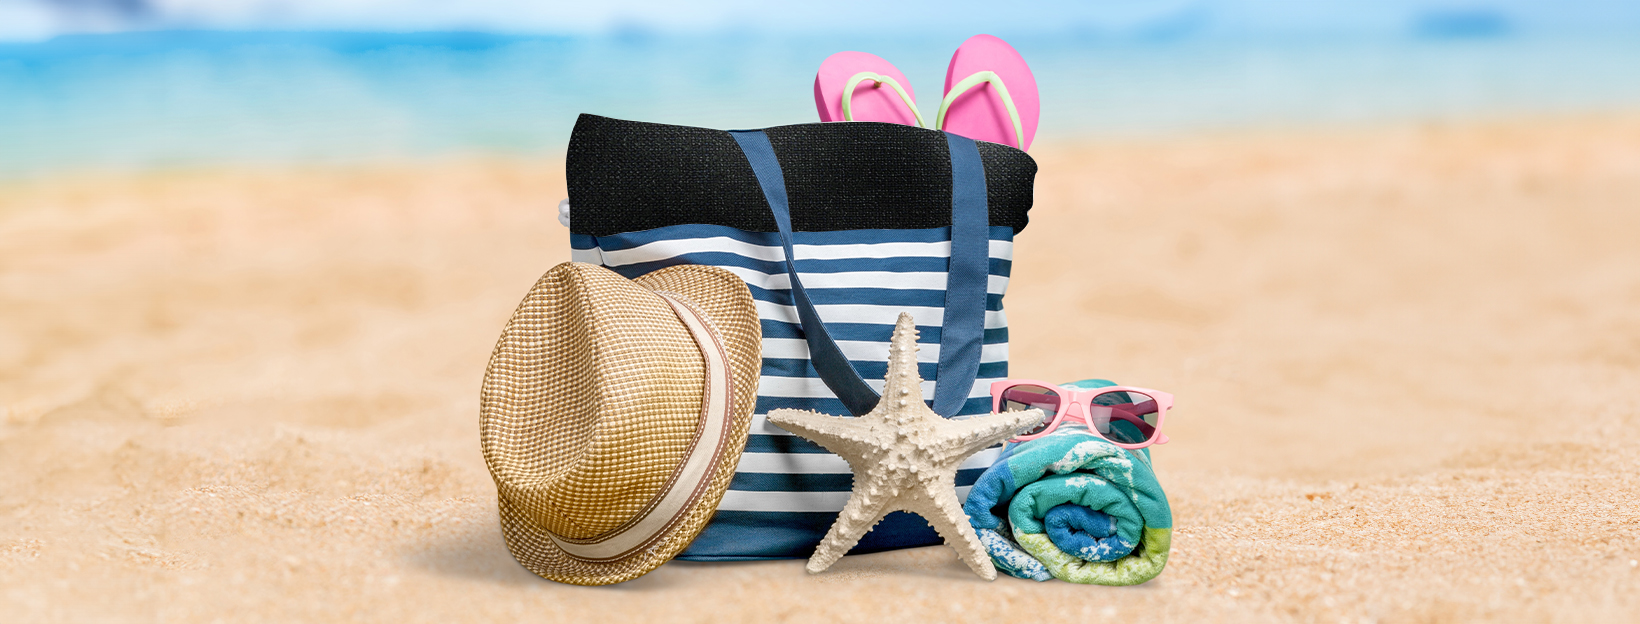 Shore to Door: 20 Creative Beach Bags Promotion Ideas for Your Brand!